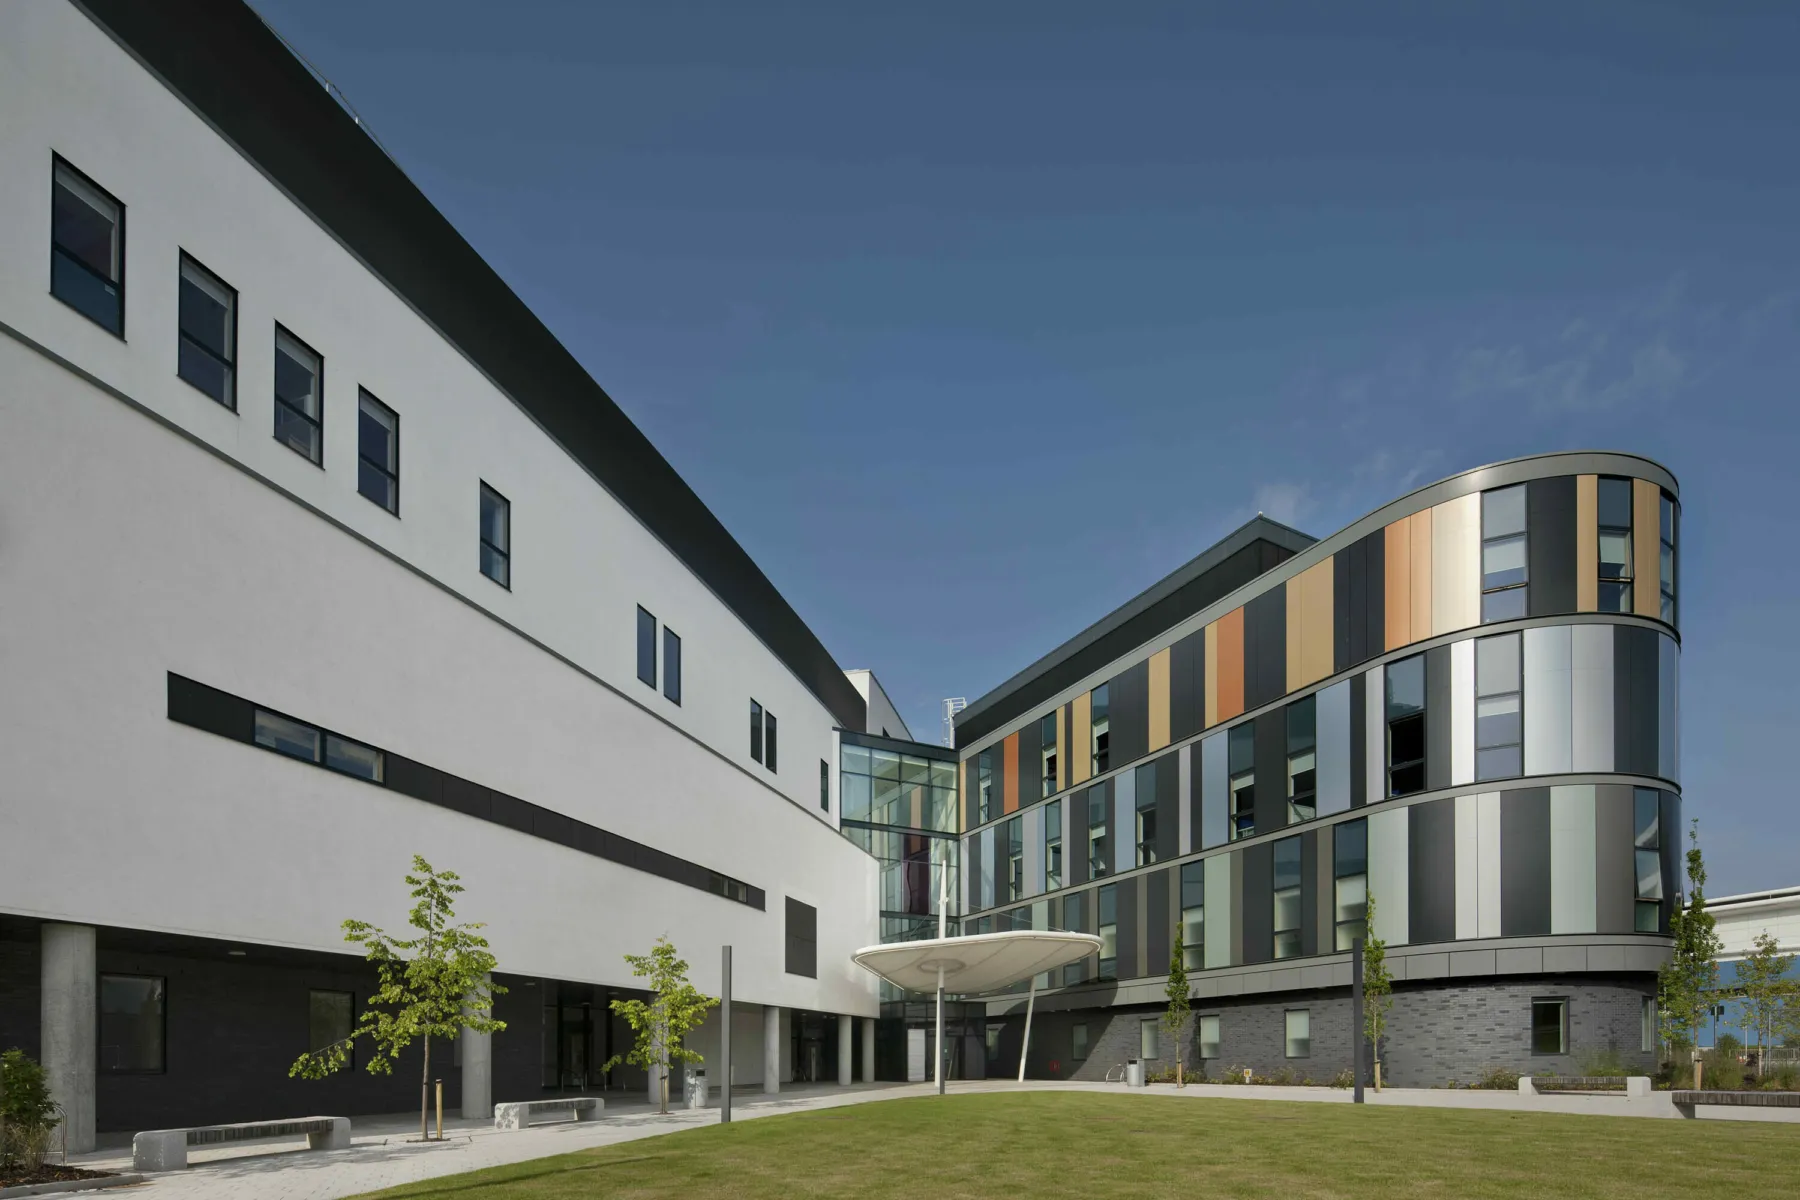 View of the exterior of the Royal Hospital for Sick Children And Young People, Edinburgh. Landscaped areas and trees sit along side two sections of the building  which meet at a canopied entrance. On the left the building has white render, on the right a bow-ended building is clad in copper and silver tones with large windows.